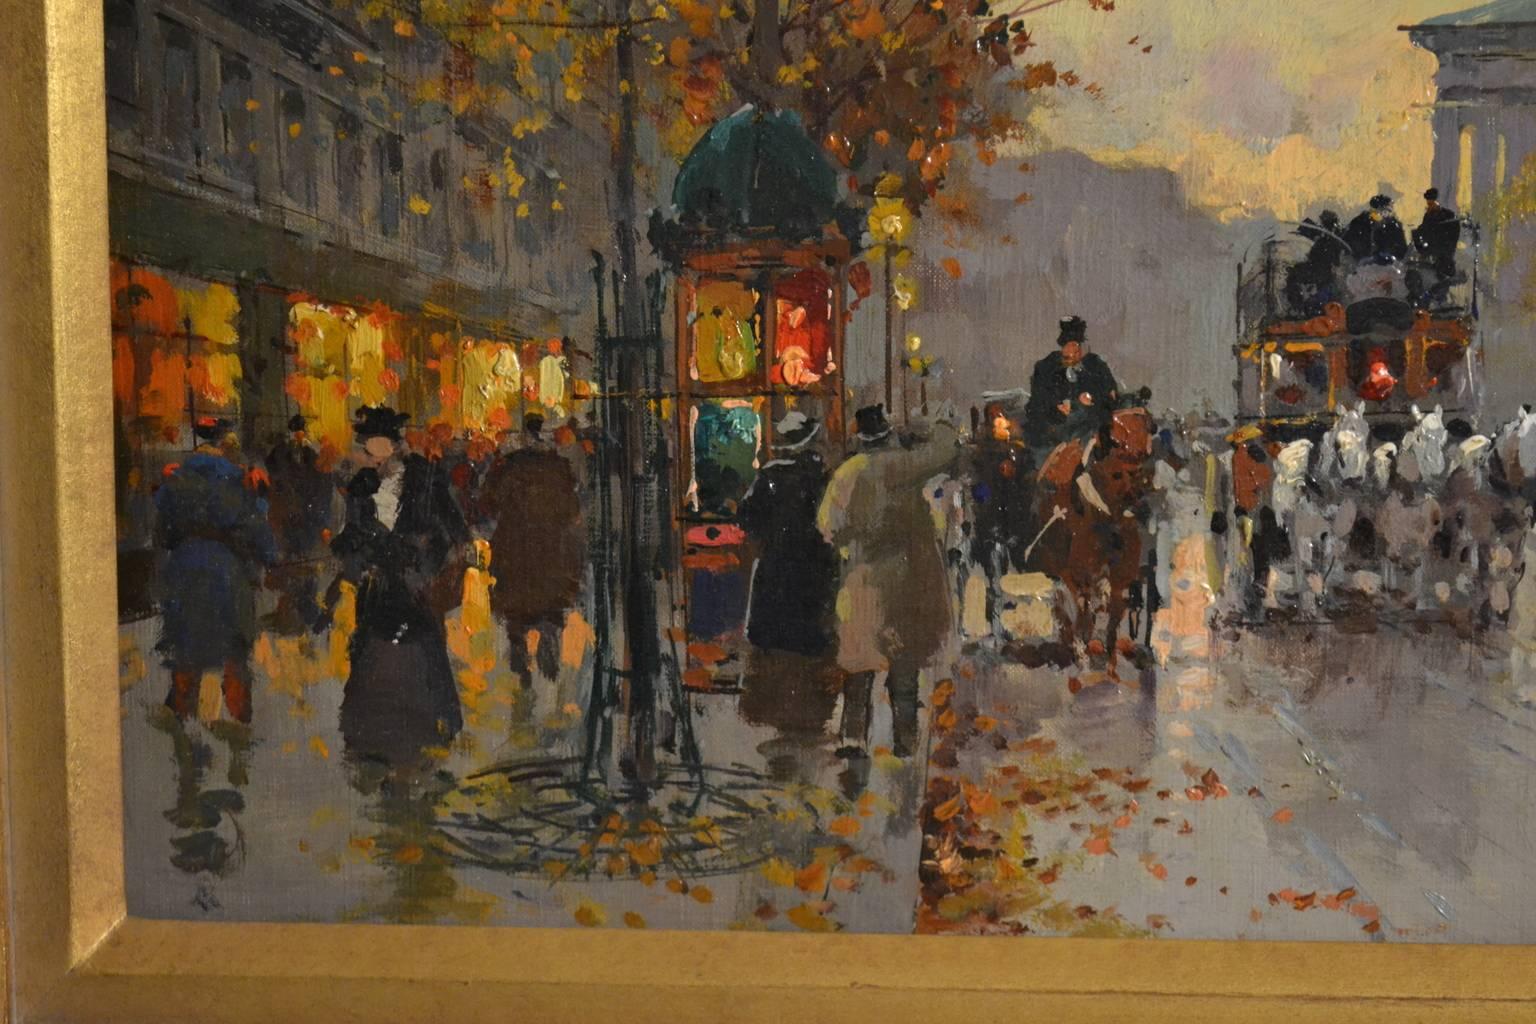 An original oil by Edoaurd Leon Cortes
canvas size is 13 x 18 inches
circa 1945
This painting depicts Paris at the turn of the century.
A letter of Authenticity from David Klein accompanies this painting.
oil on canvas, laid on board
Shows